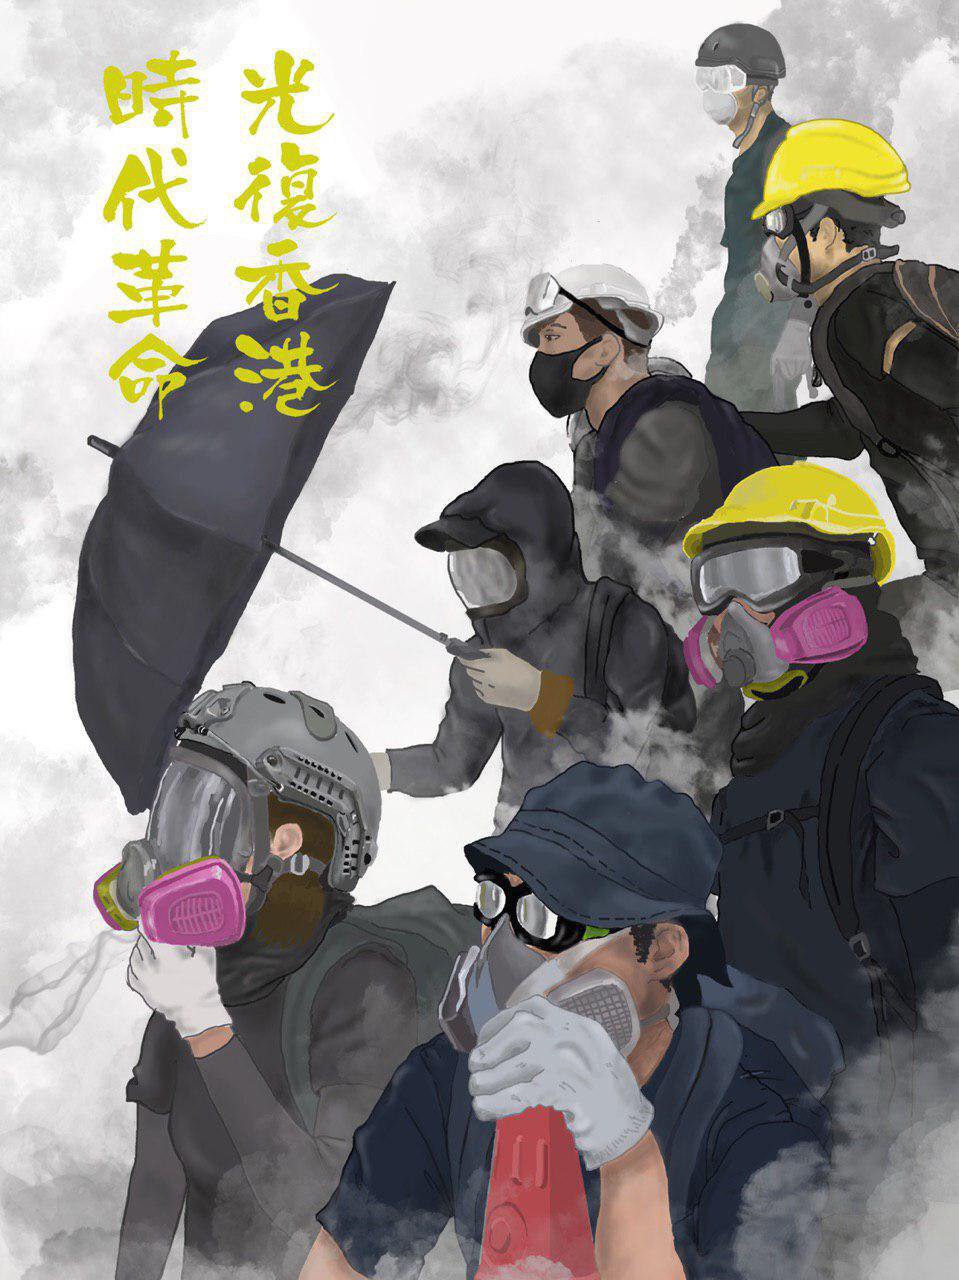 An illustration of seven frontline protestors standing in a dense cloud of smoke, some in hard hats, a few in just soft hats. Most are wearing eye protection in the form of goggles, swim goggles, or a full-face respirator. Everyone is masked. The protestor in the bottom center of the image has his hand on a traffic cone.